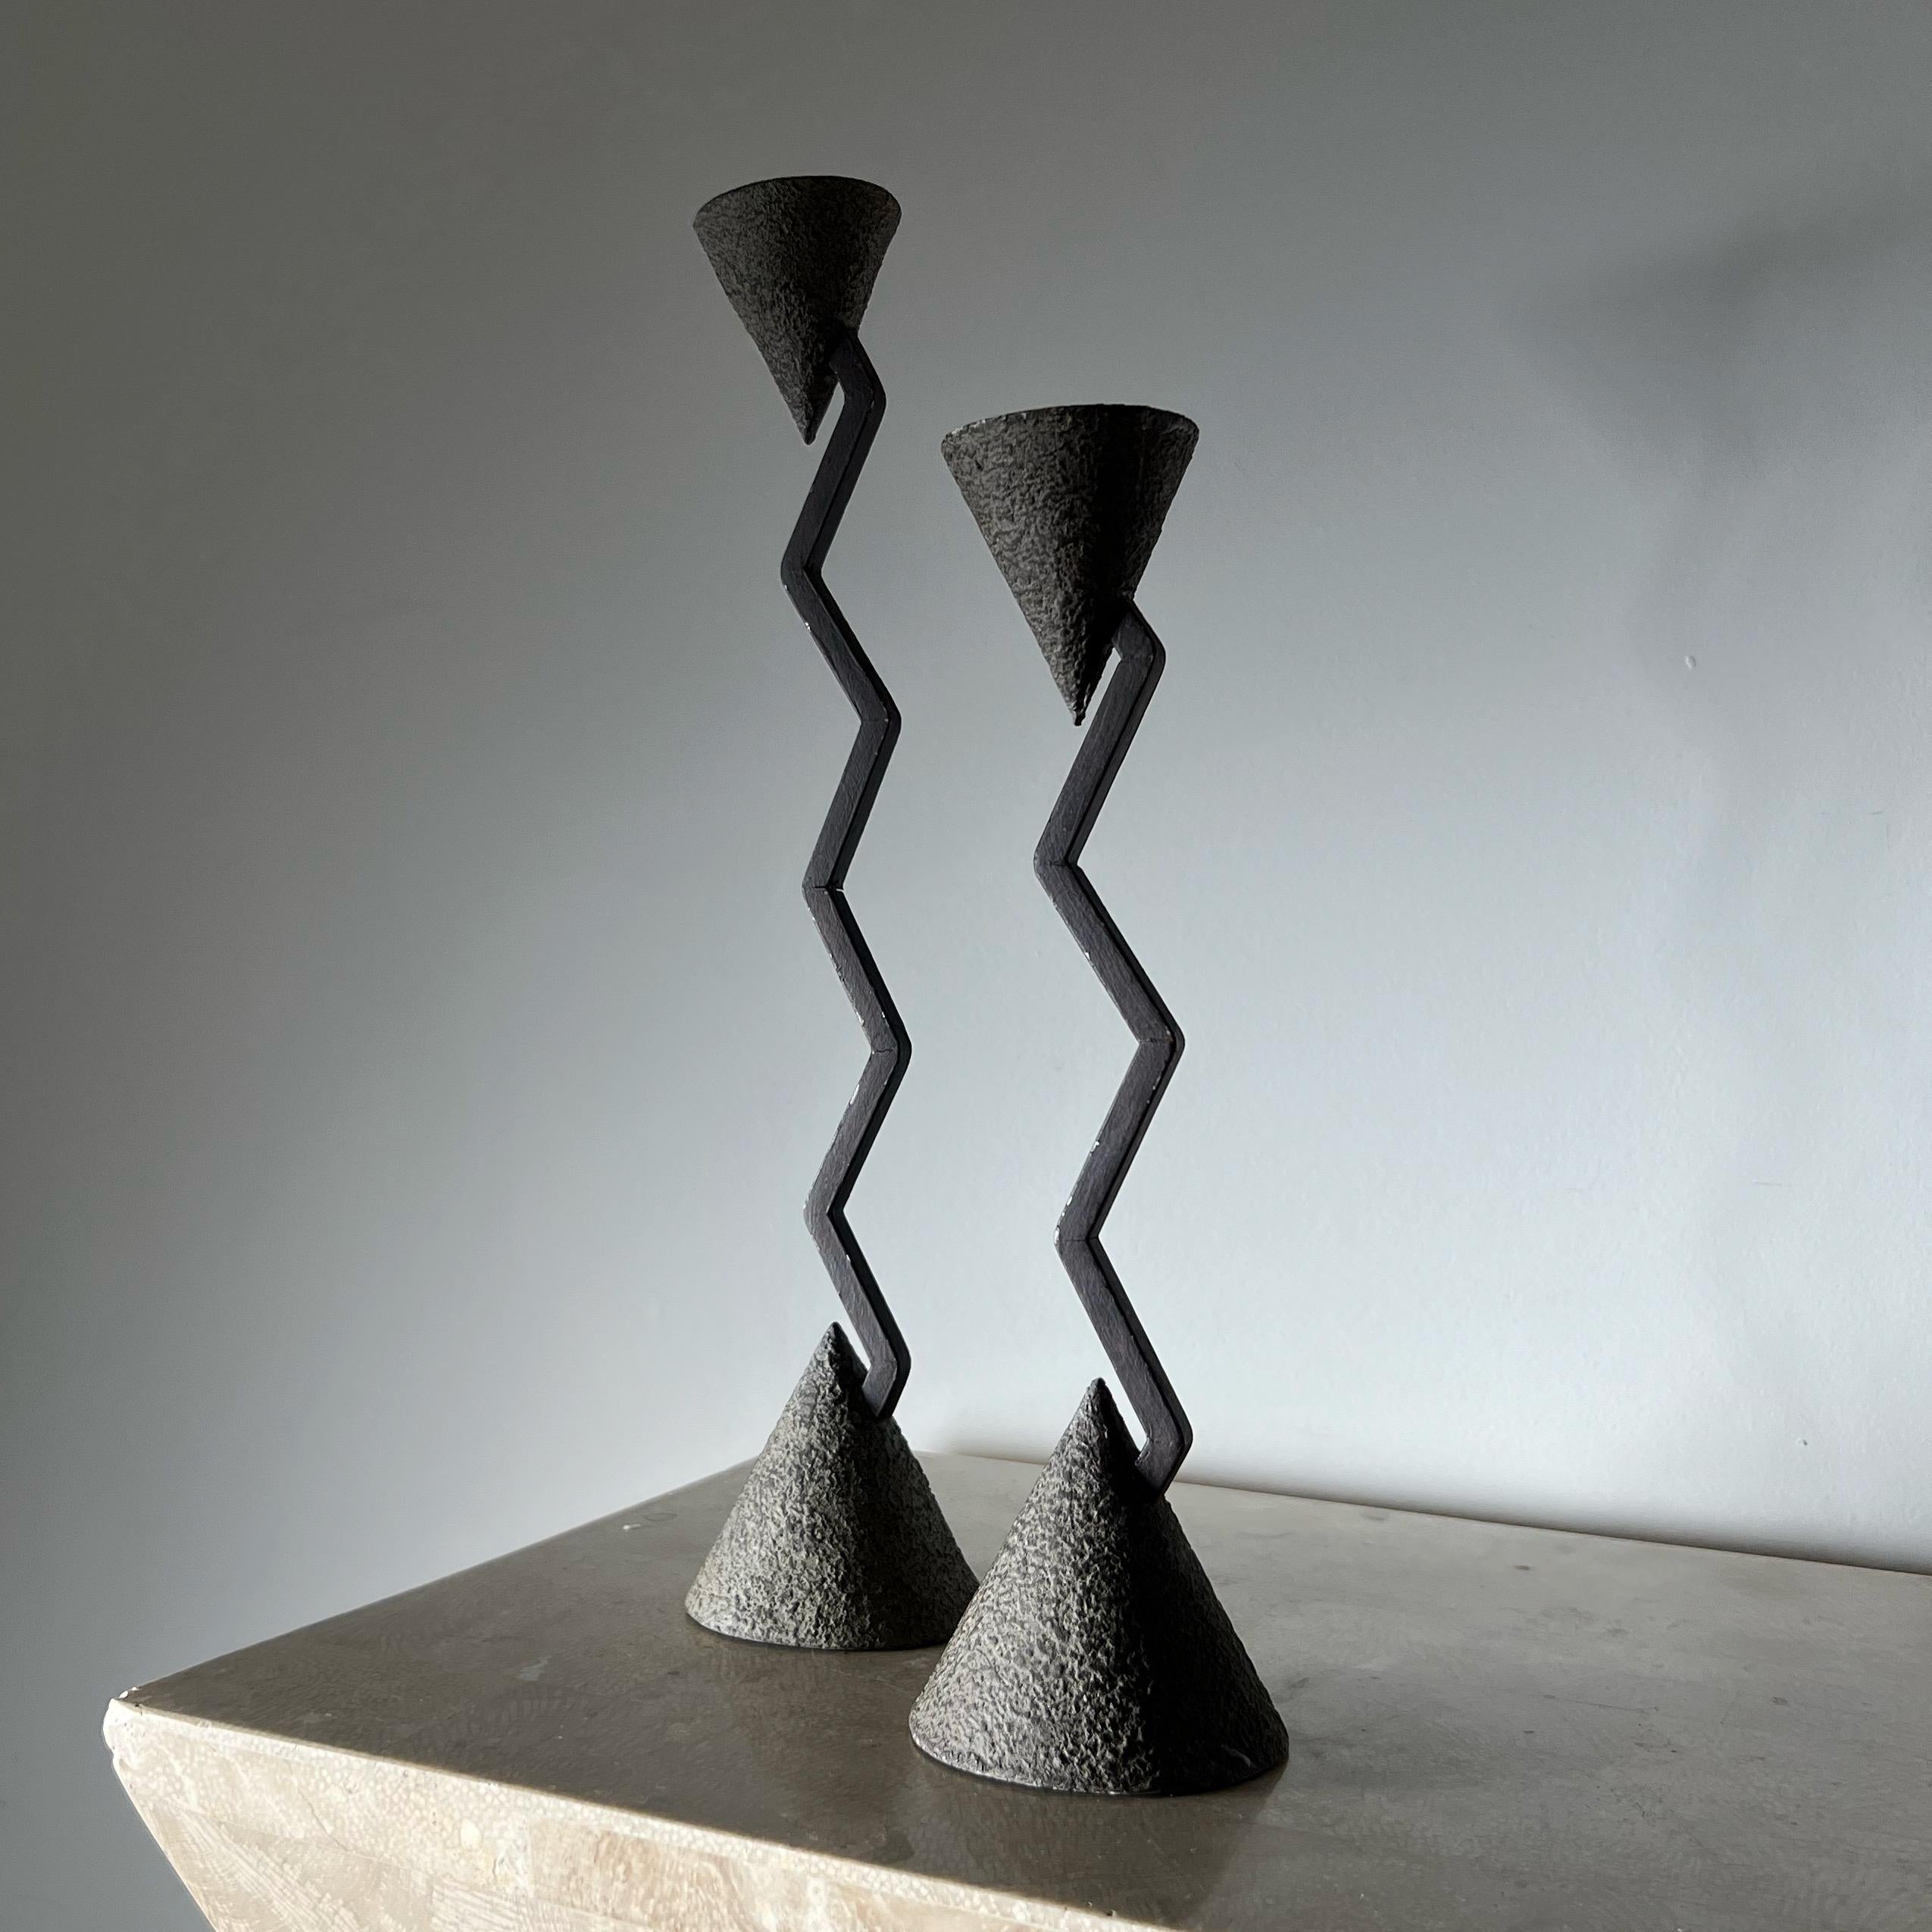 A pair of brutalist hand-forged iron candlesticks by Milano Series. Made in the Philippines circa 1990. Fabulous geometry with conical bases and tops and shameless zigzag bodies. Black velvet vases also include original provenance stickers. Minor